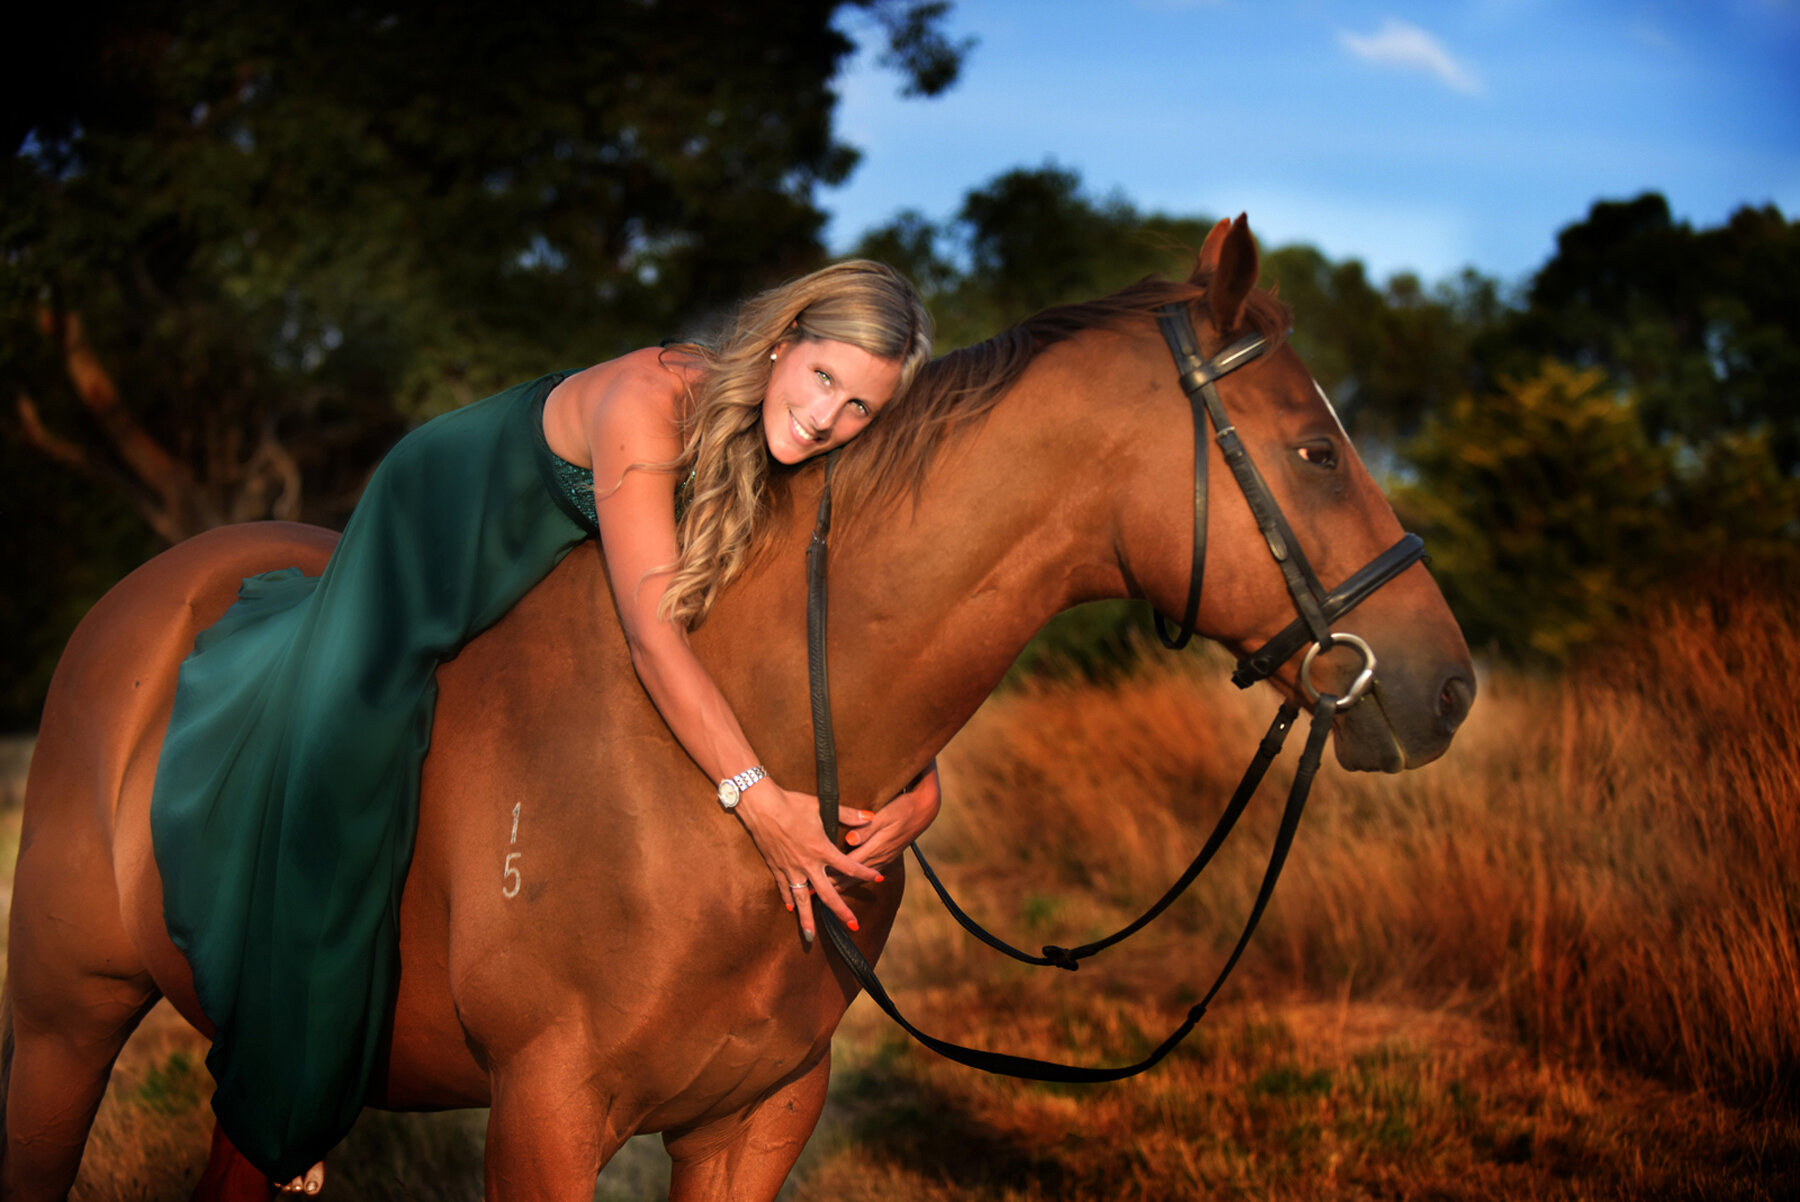 The Goddess and the Horse Equine Photographic Art